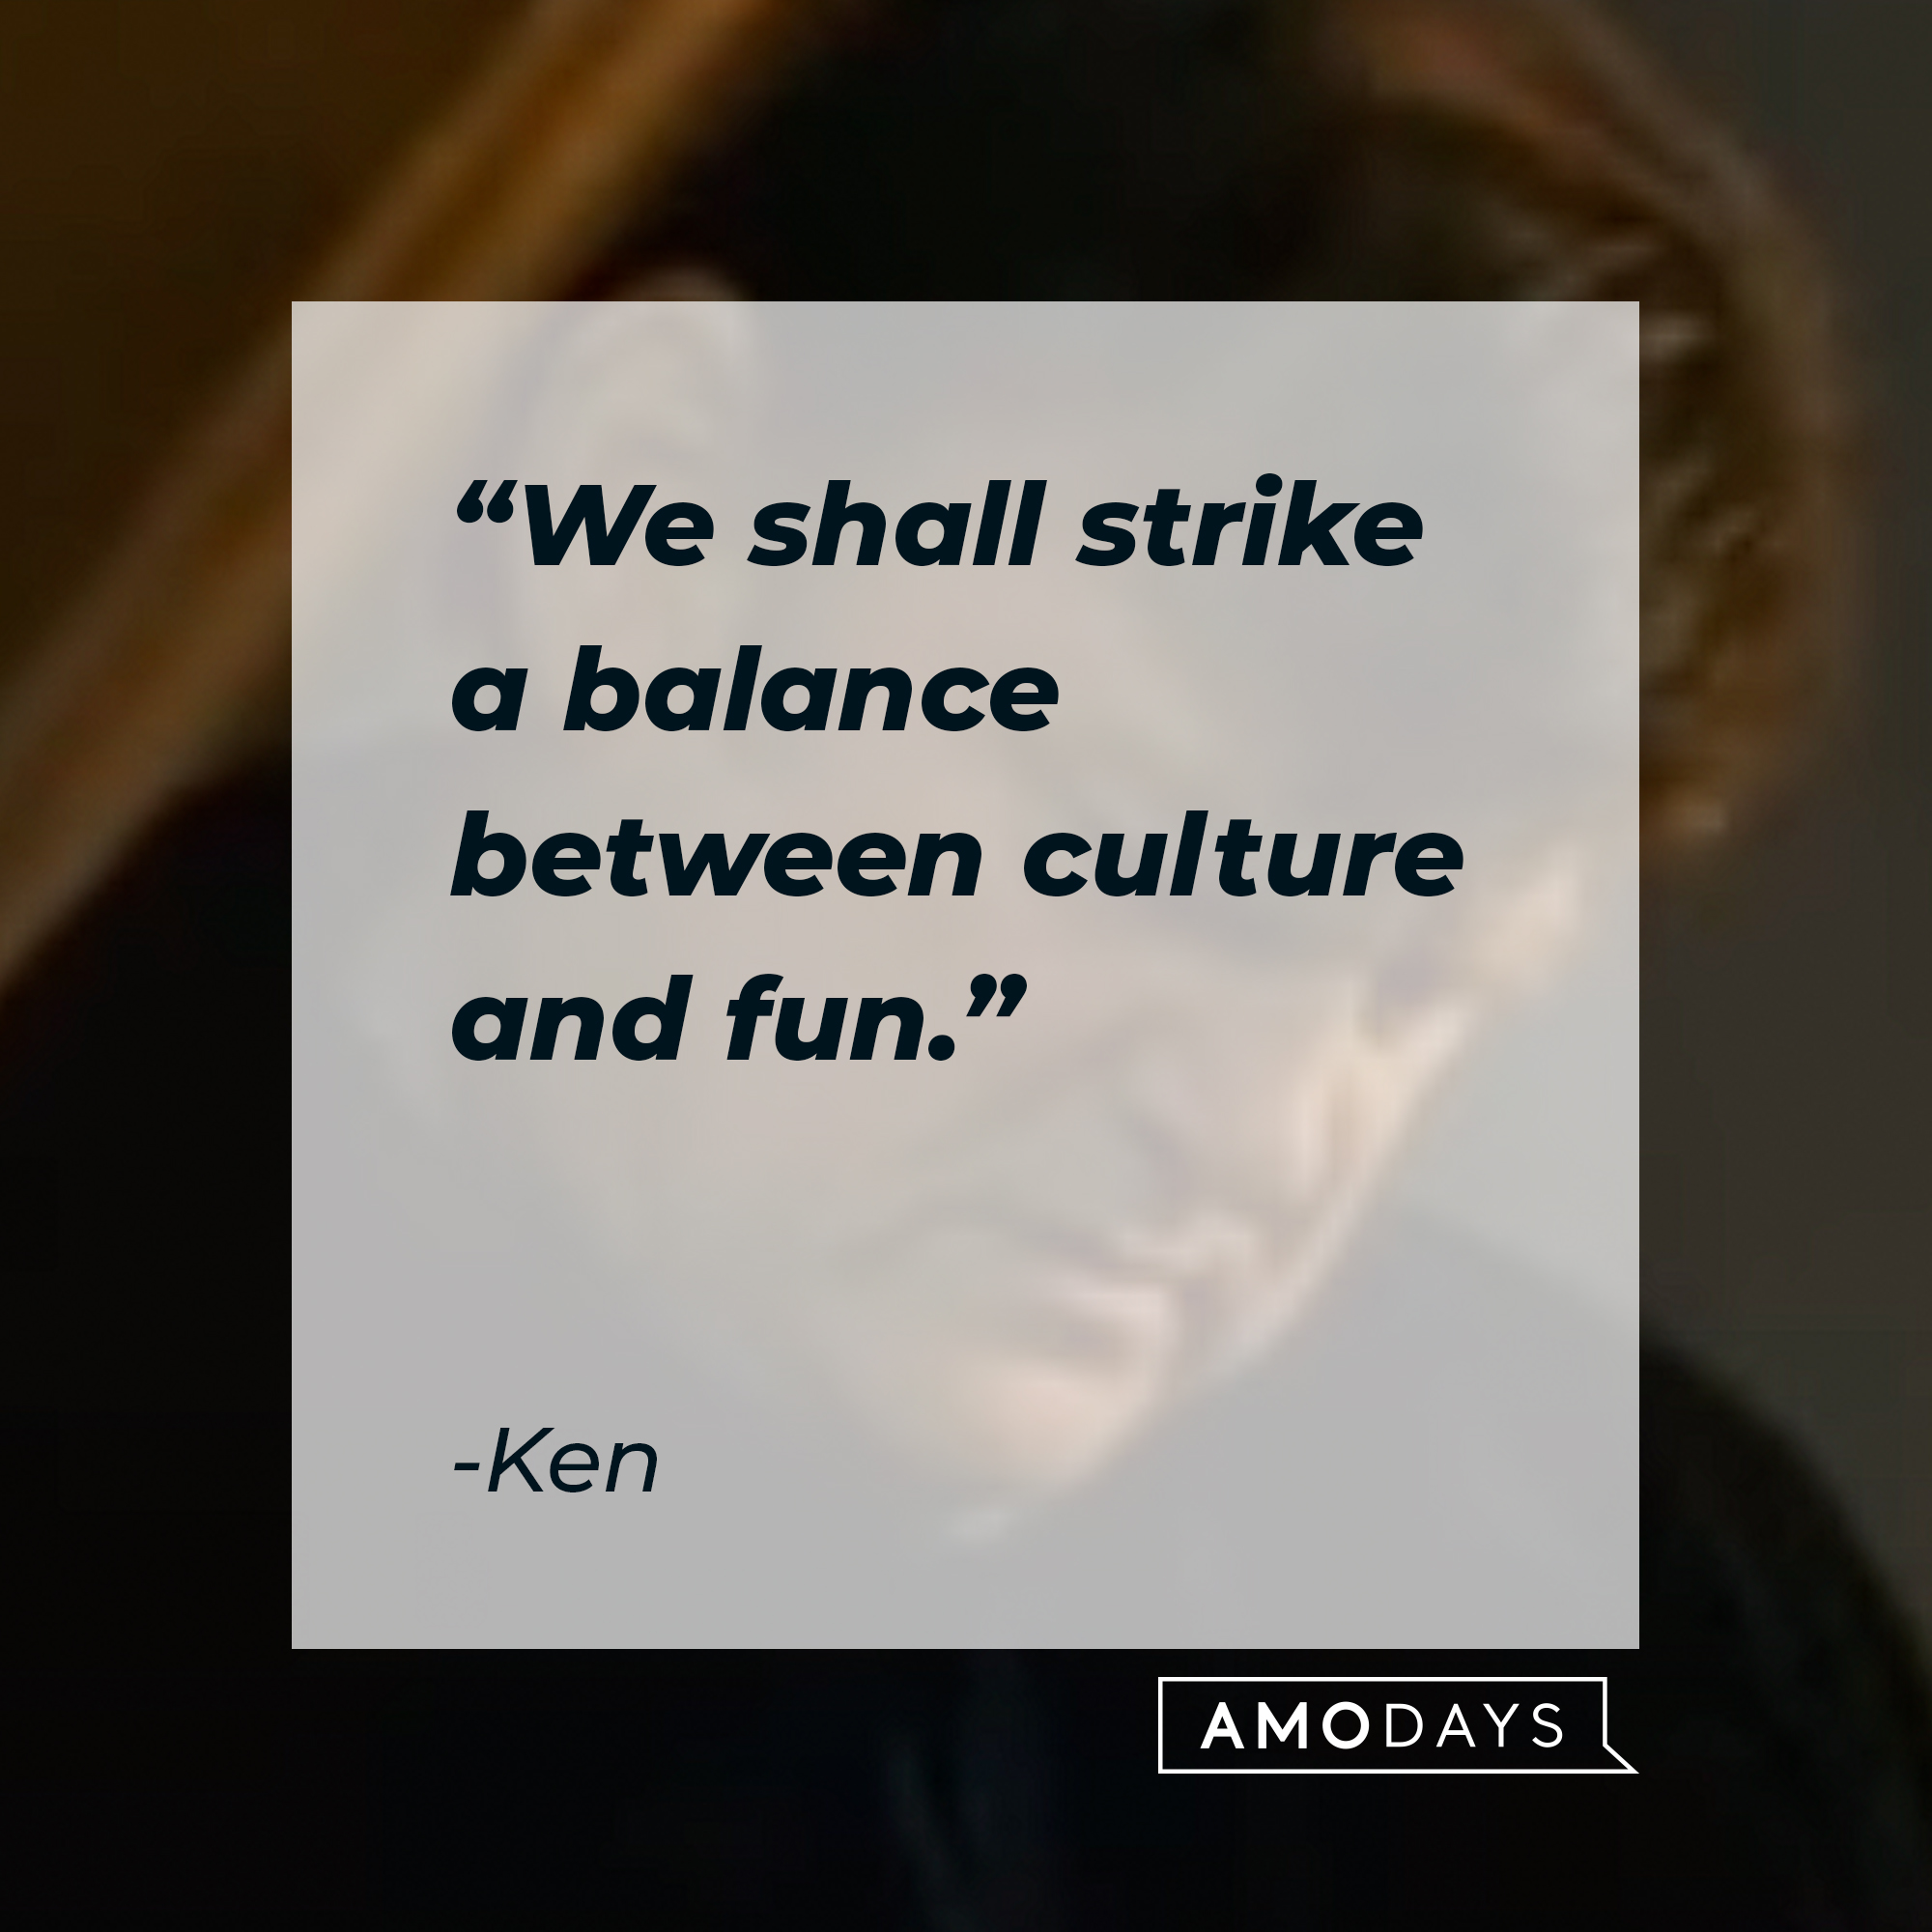 Ken with his quote: "We shall strike a balance between culture and fun." | Source: Youtube.com/FocusFeatures